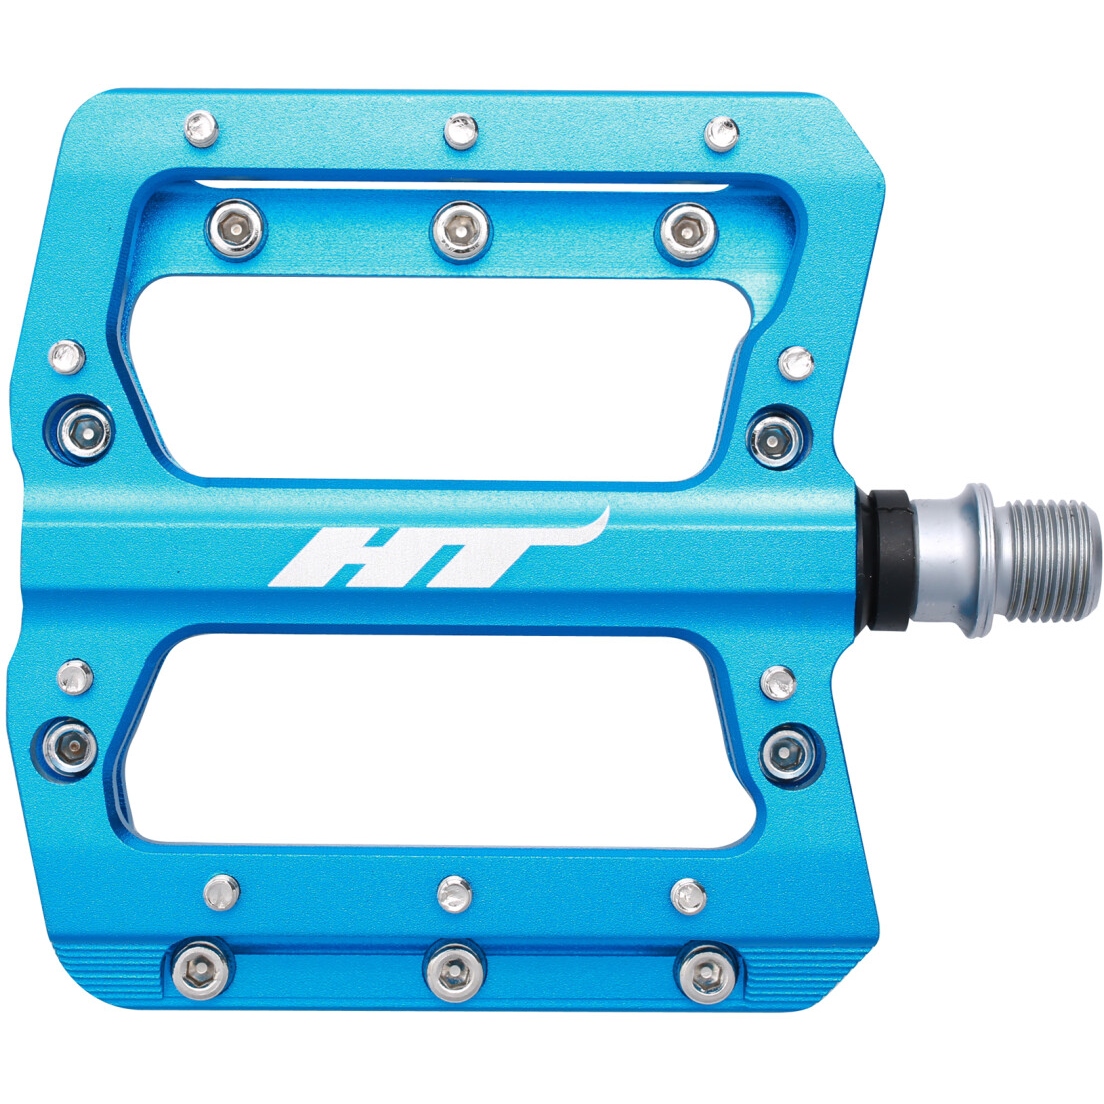 Picture of HT AN14 NANO Flat Pedal - marine blue